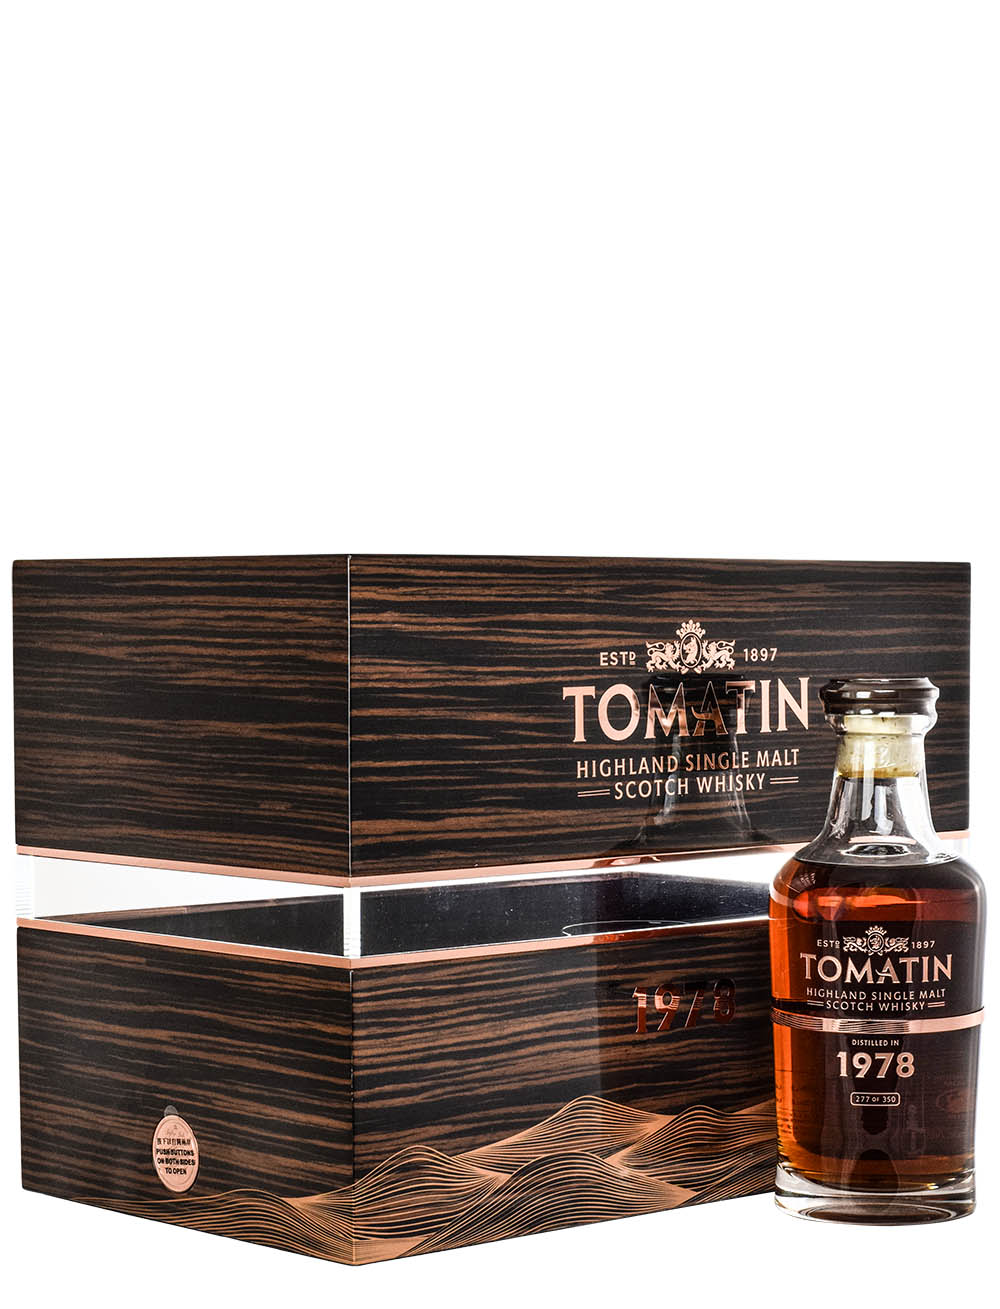 Tomatin 42 Years Old 1978 Vintage Warehouse 6 Collection Box 2 Must Have Malts MHM